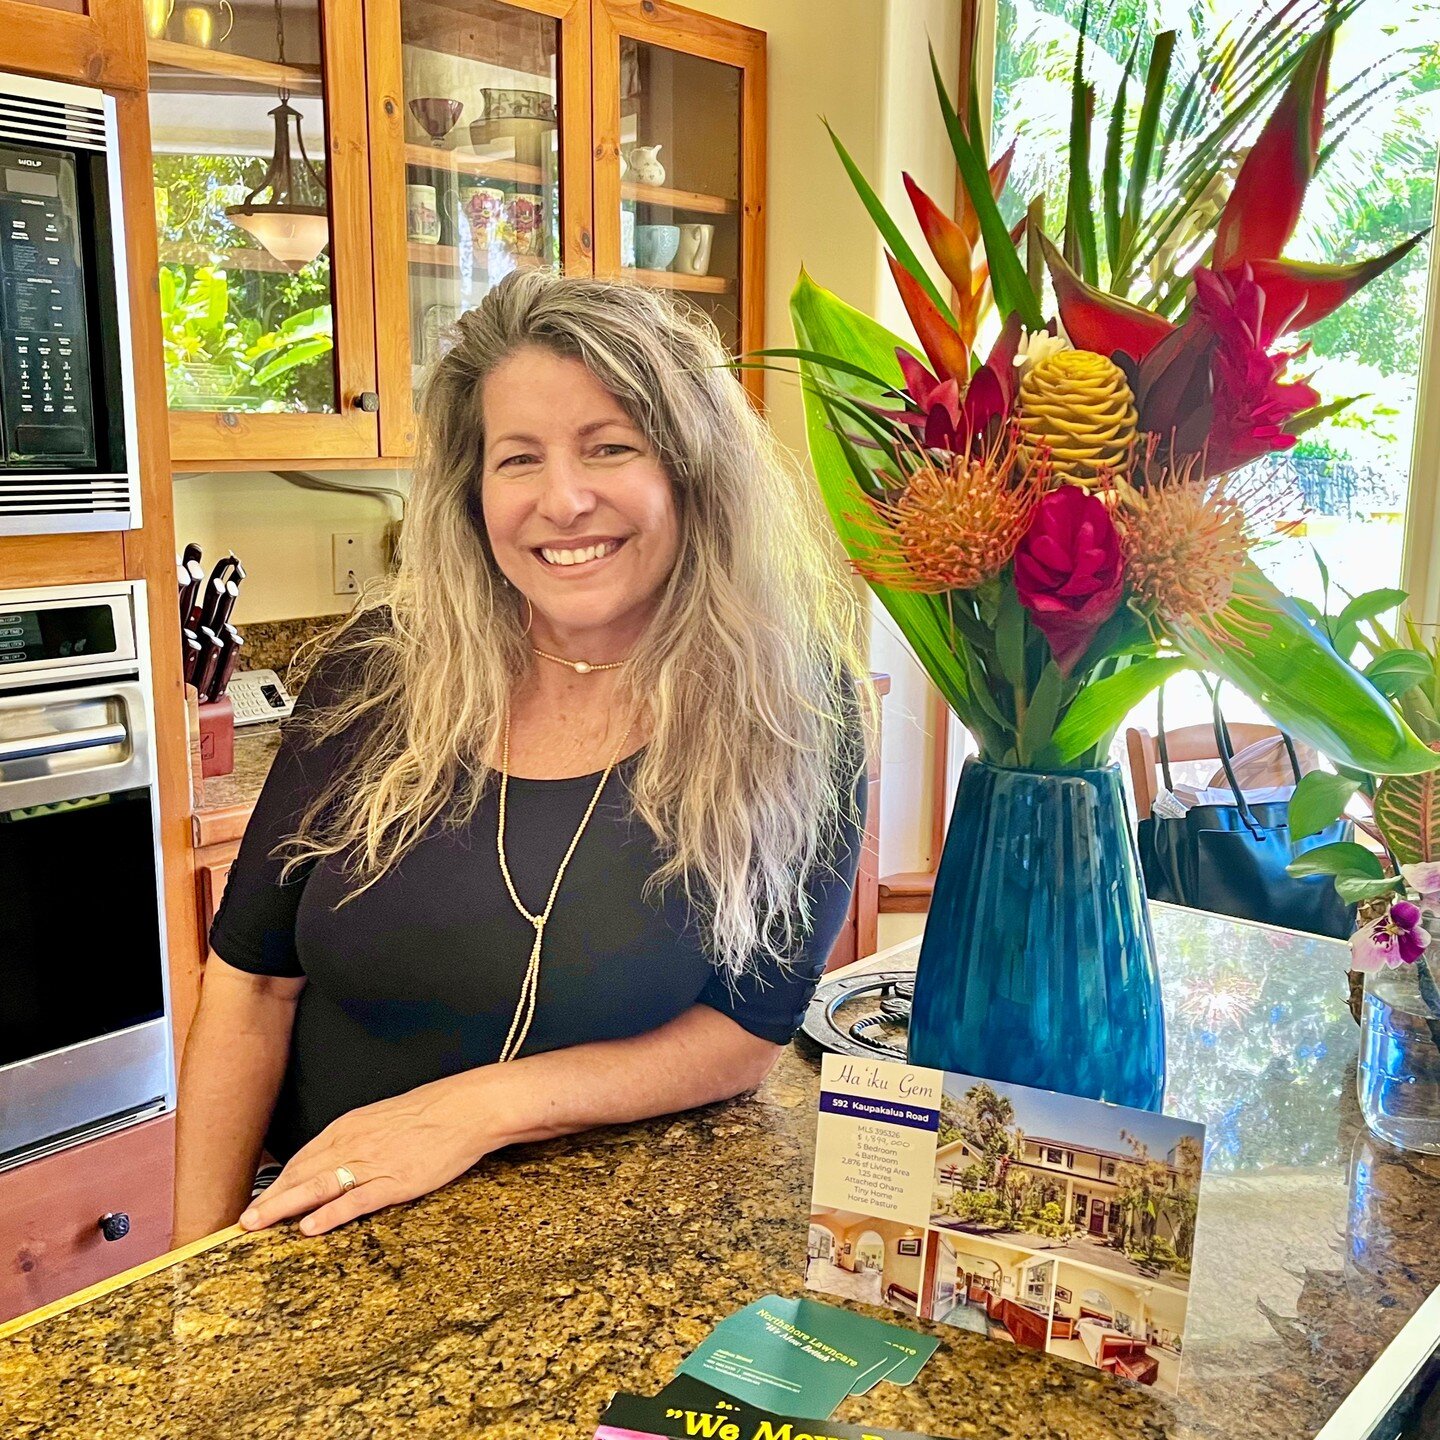 As the market begins to change, we want our Maui Realtor partners to know we've got their backs! And Kelly Lau - we've got yours! 

Need fresh tropical bouquets for your open houses? Give us a call - we'll bring you a bunch! 

Need a breakdown of law